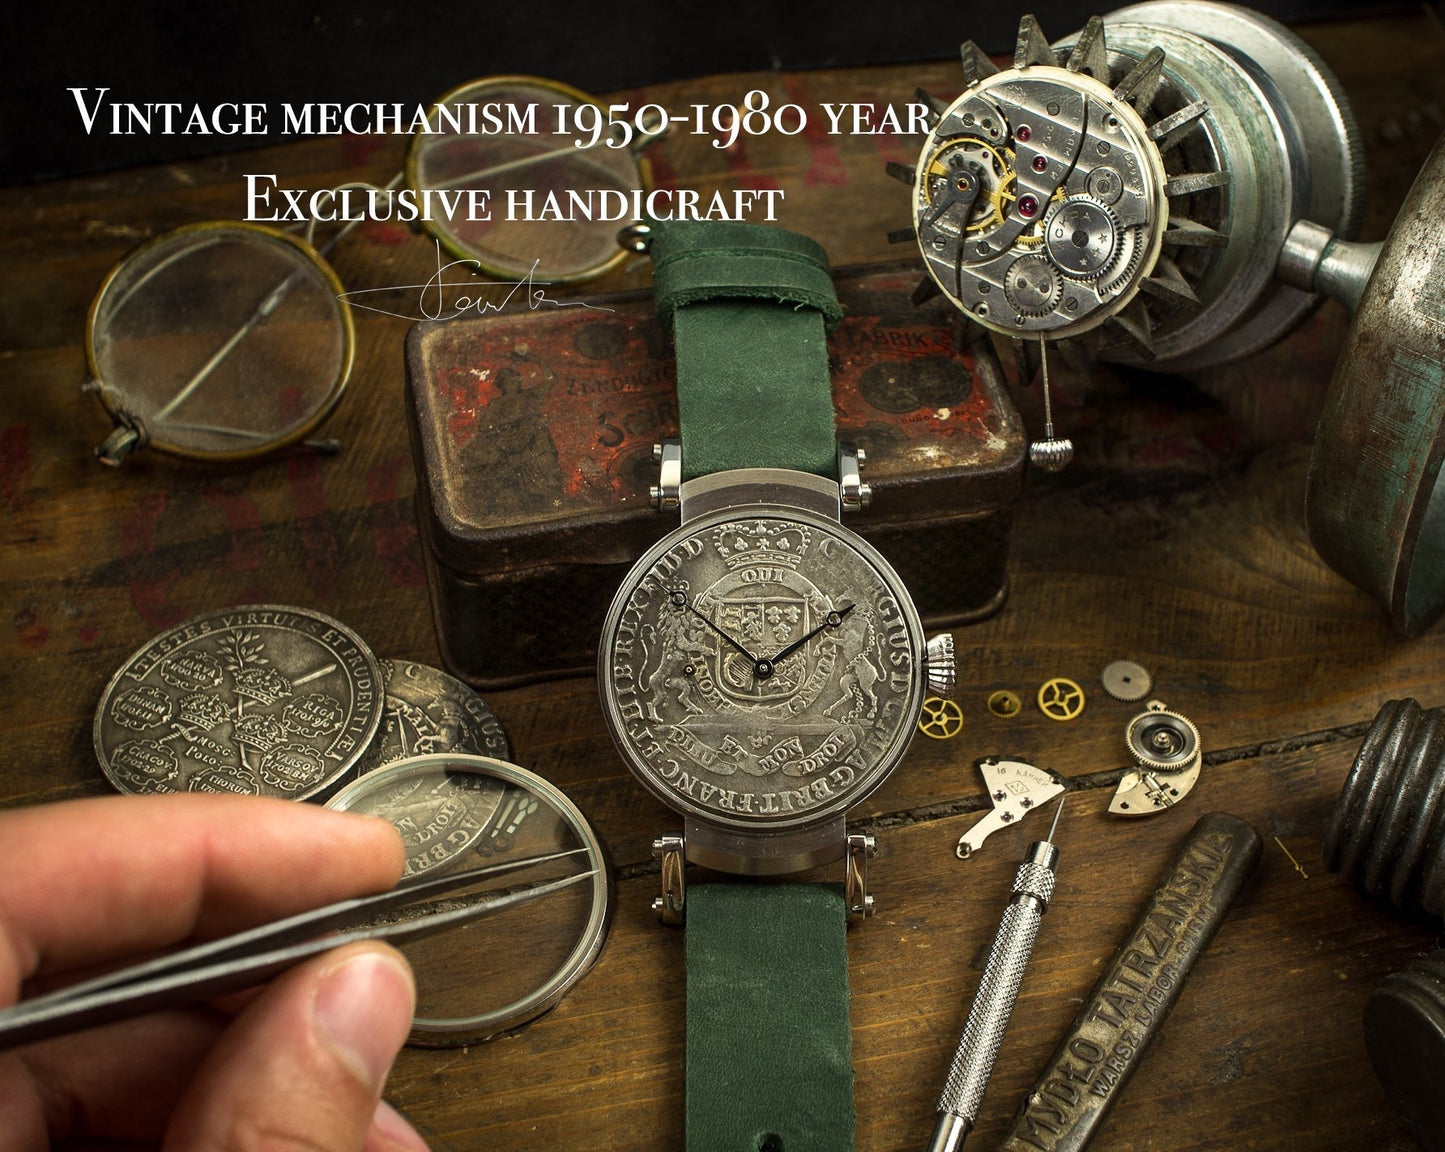 Exclusive Marriage watch, vintage movement 1950-1980 limited edition.